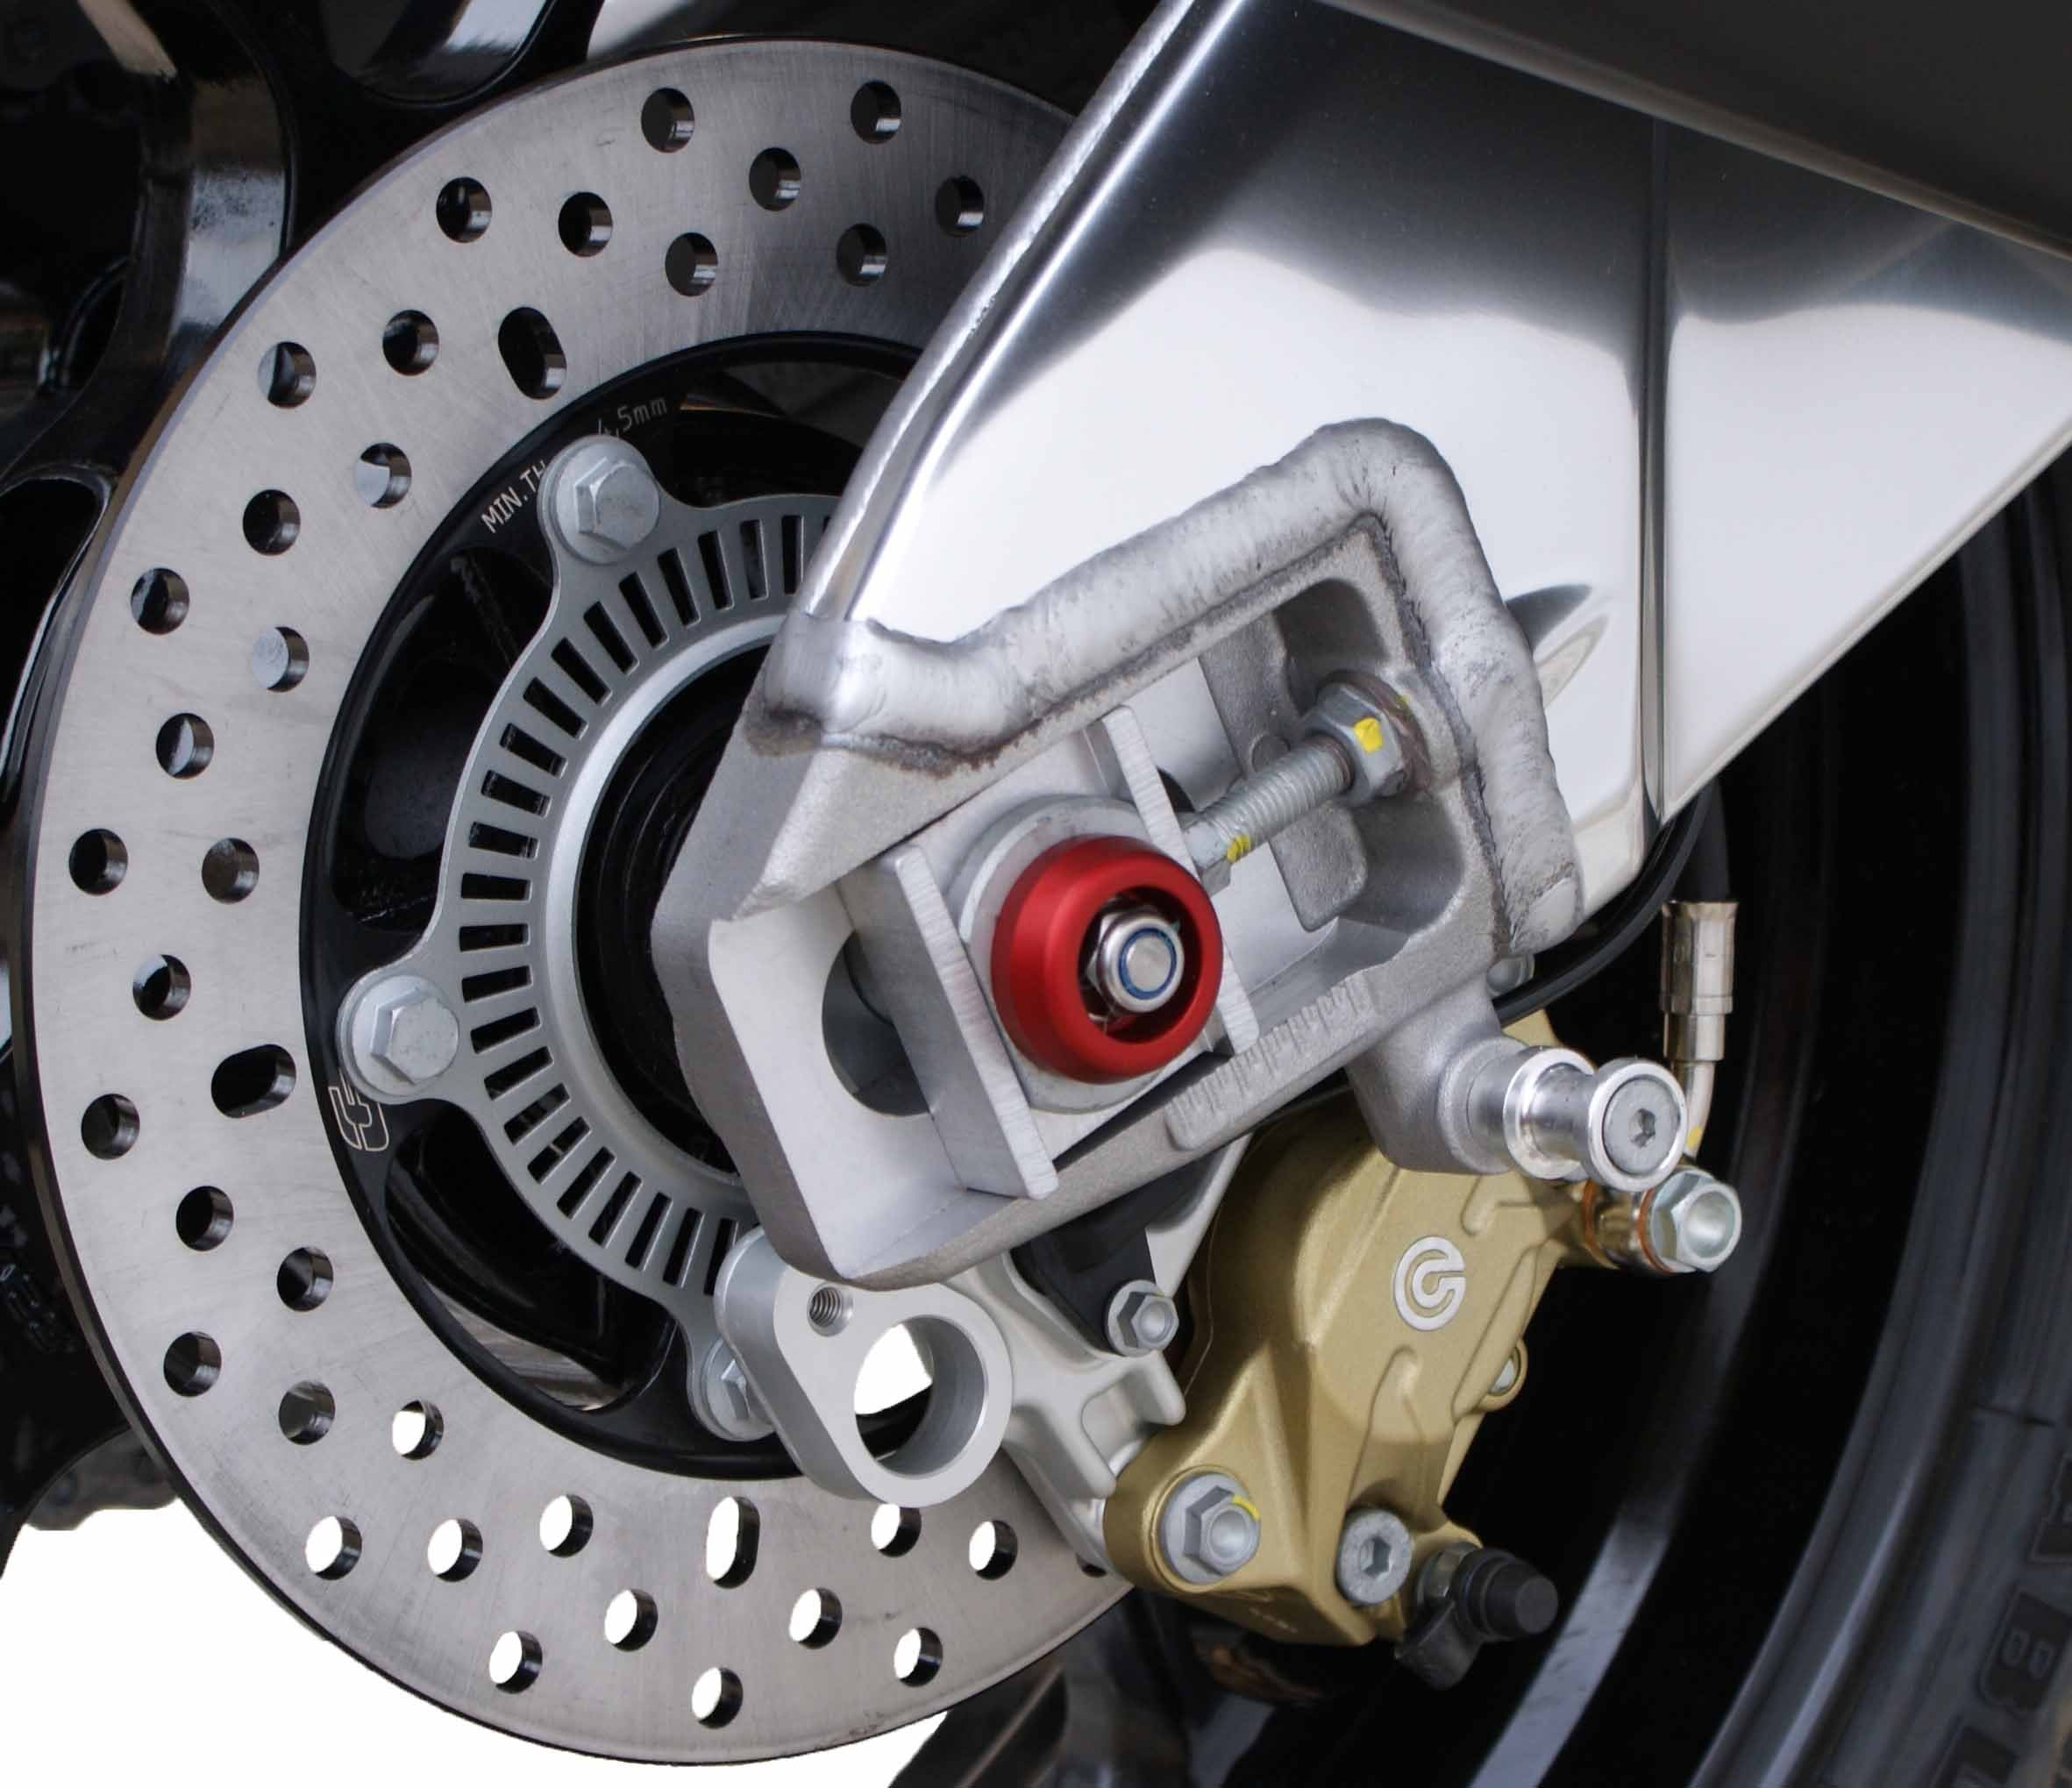 The exhaust side rear wheel of the Aprilia RSV4 RF with EPs attractive red anodised hub stop fitted.